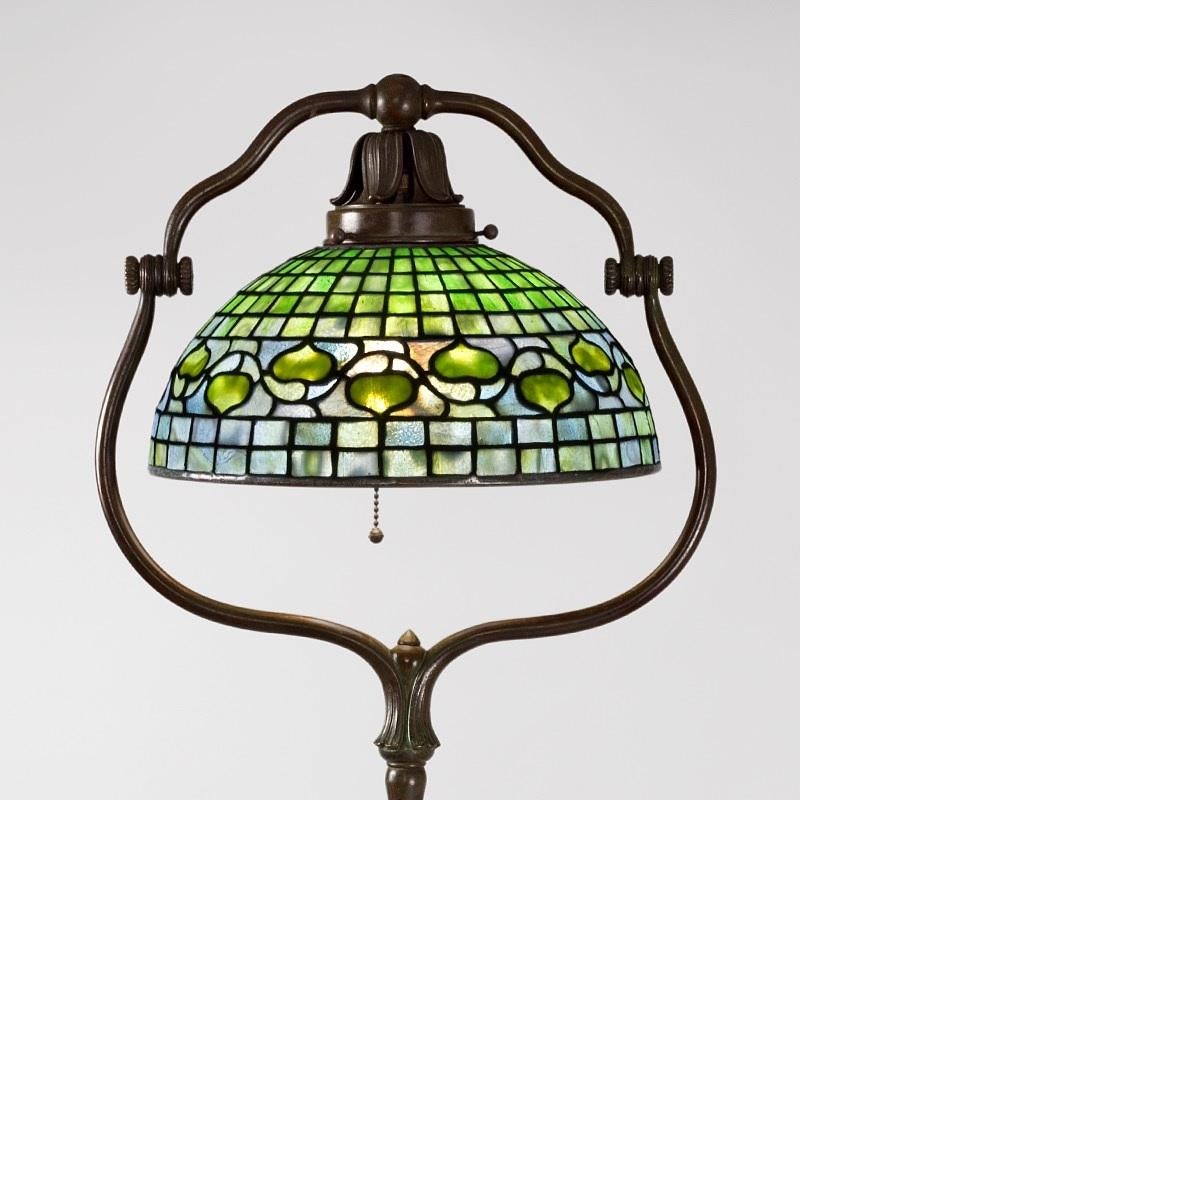 A Tiffany Studios New York “Acorn” bronze and leaded glass floor lamp. The shade feature a yellow acorn leaf and vine motif against a mottled green geometric “brick” ground. The shade is suspended within patinated bronze “Harp” base.

The lamp